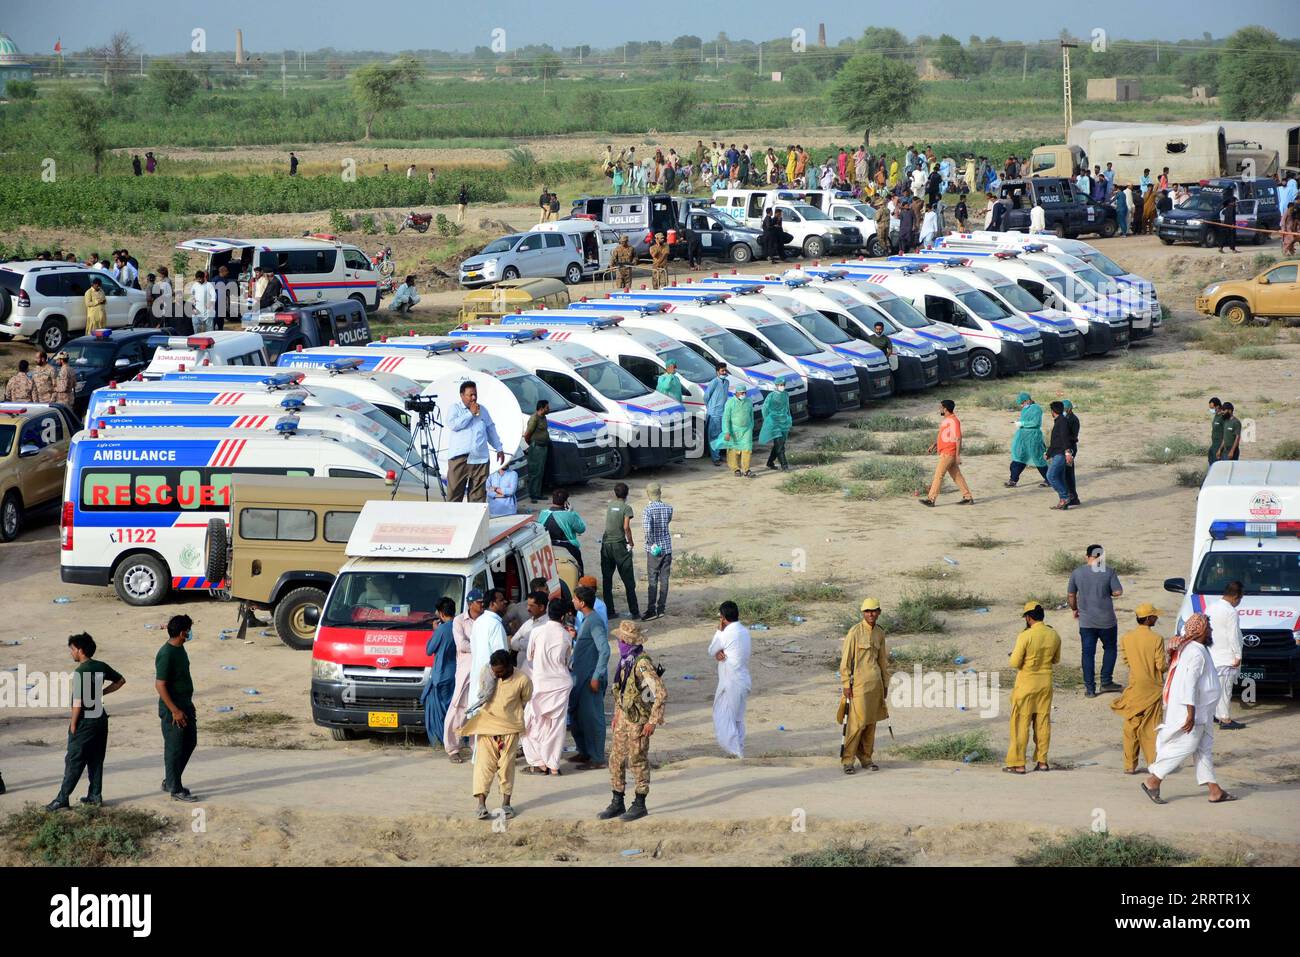 230807 -- SANGHAR, Aug. 7, 2023 -- Ambulances park at the site of a train accident in Sanghar district of Pakistan s southern Sindh province, on Aug. 6, 2023. At least 22 people were killed and over 50 others injured on Sunday after a passenger train derailed in the Sanghar district of Pakistan s southern Sindh province, local police said. The accident took place when 10 coaches of the Hazara Express train derailed when it was crossing a canal bridge near Sarhari town in the Shahdadpur area of the district, Muhammad Younis Chandio, deputy inspector general of police of the region, told the med Stock Photo